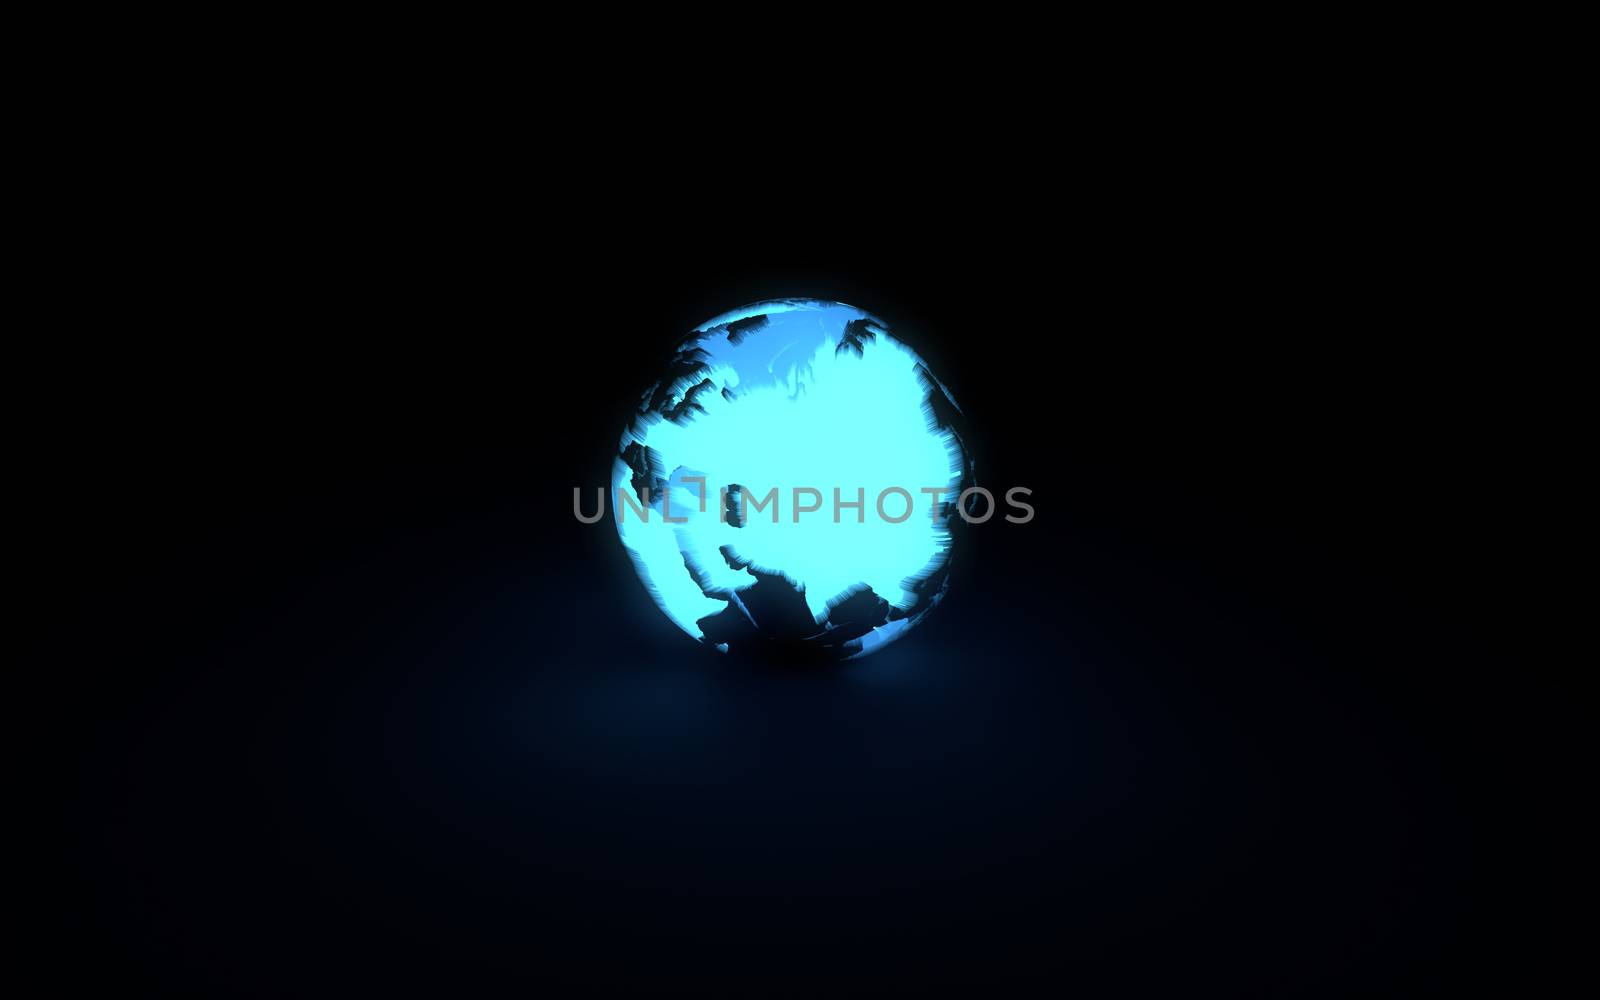 Abstract Blue Glowing Earth Globe on Black Background by clusterx